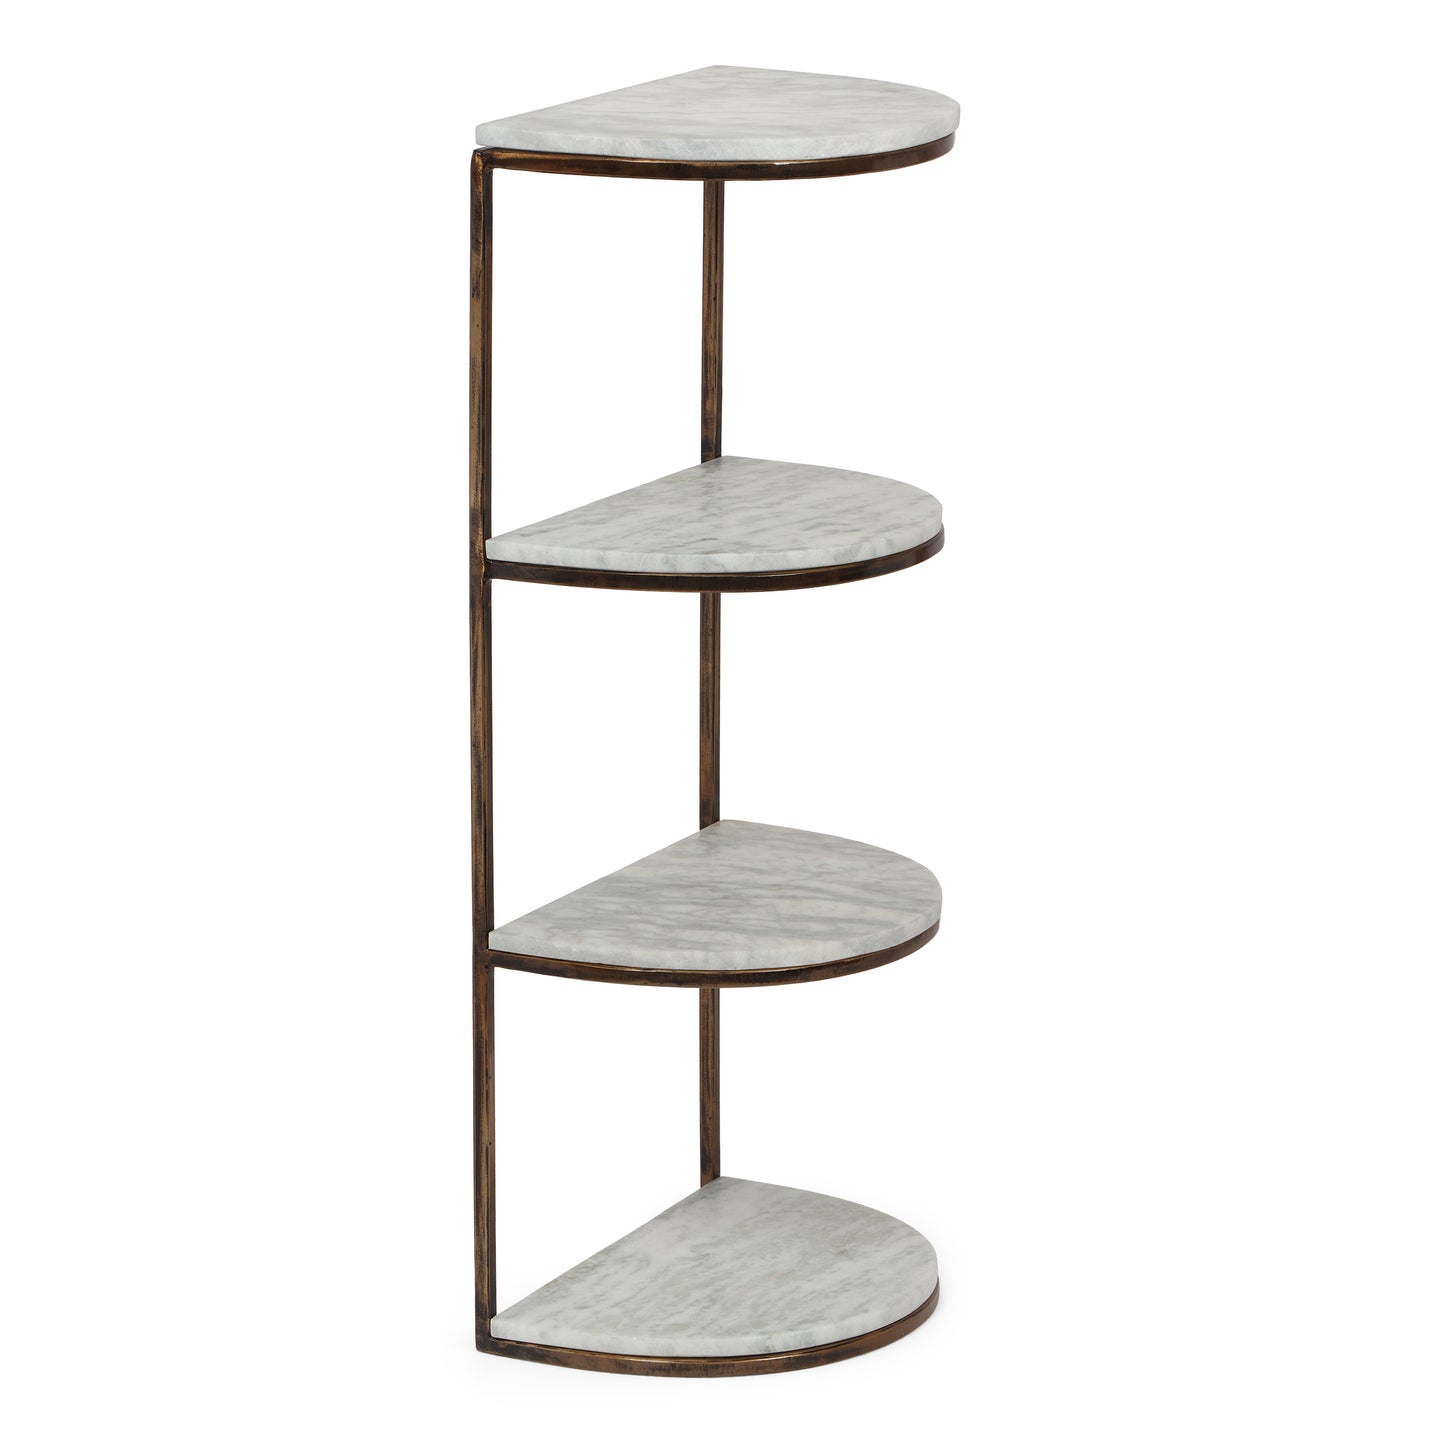 Greycliff Modern Glam Handcrafted Marble Half Round Etagere Bookcase, Natural White and Antique Brass